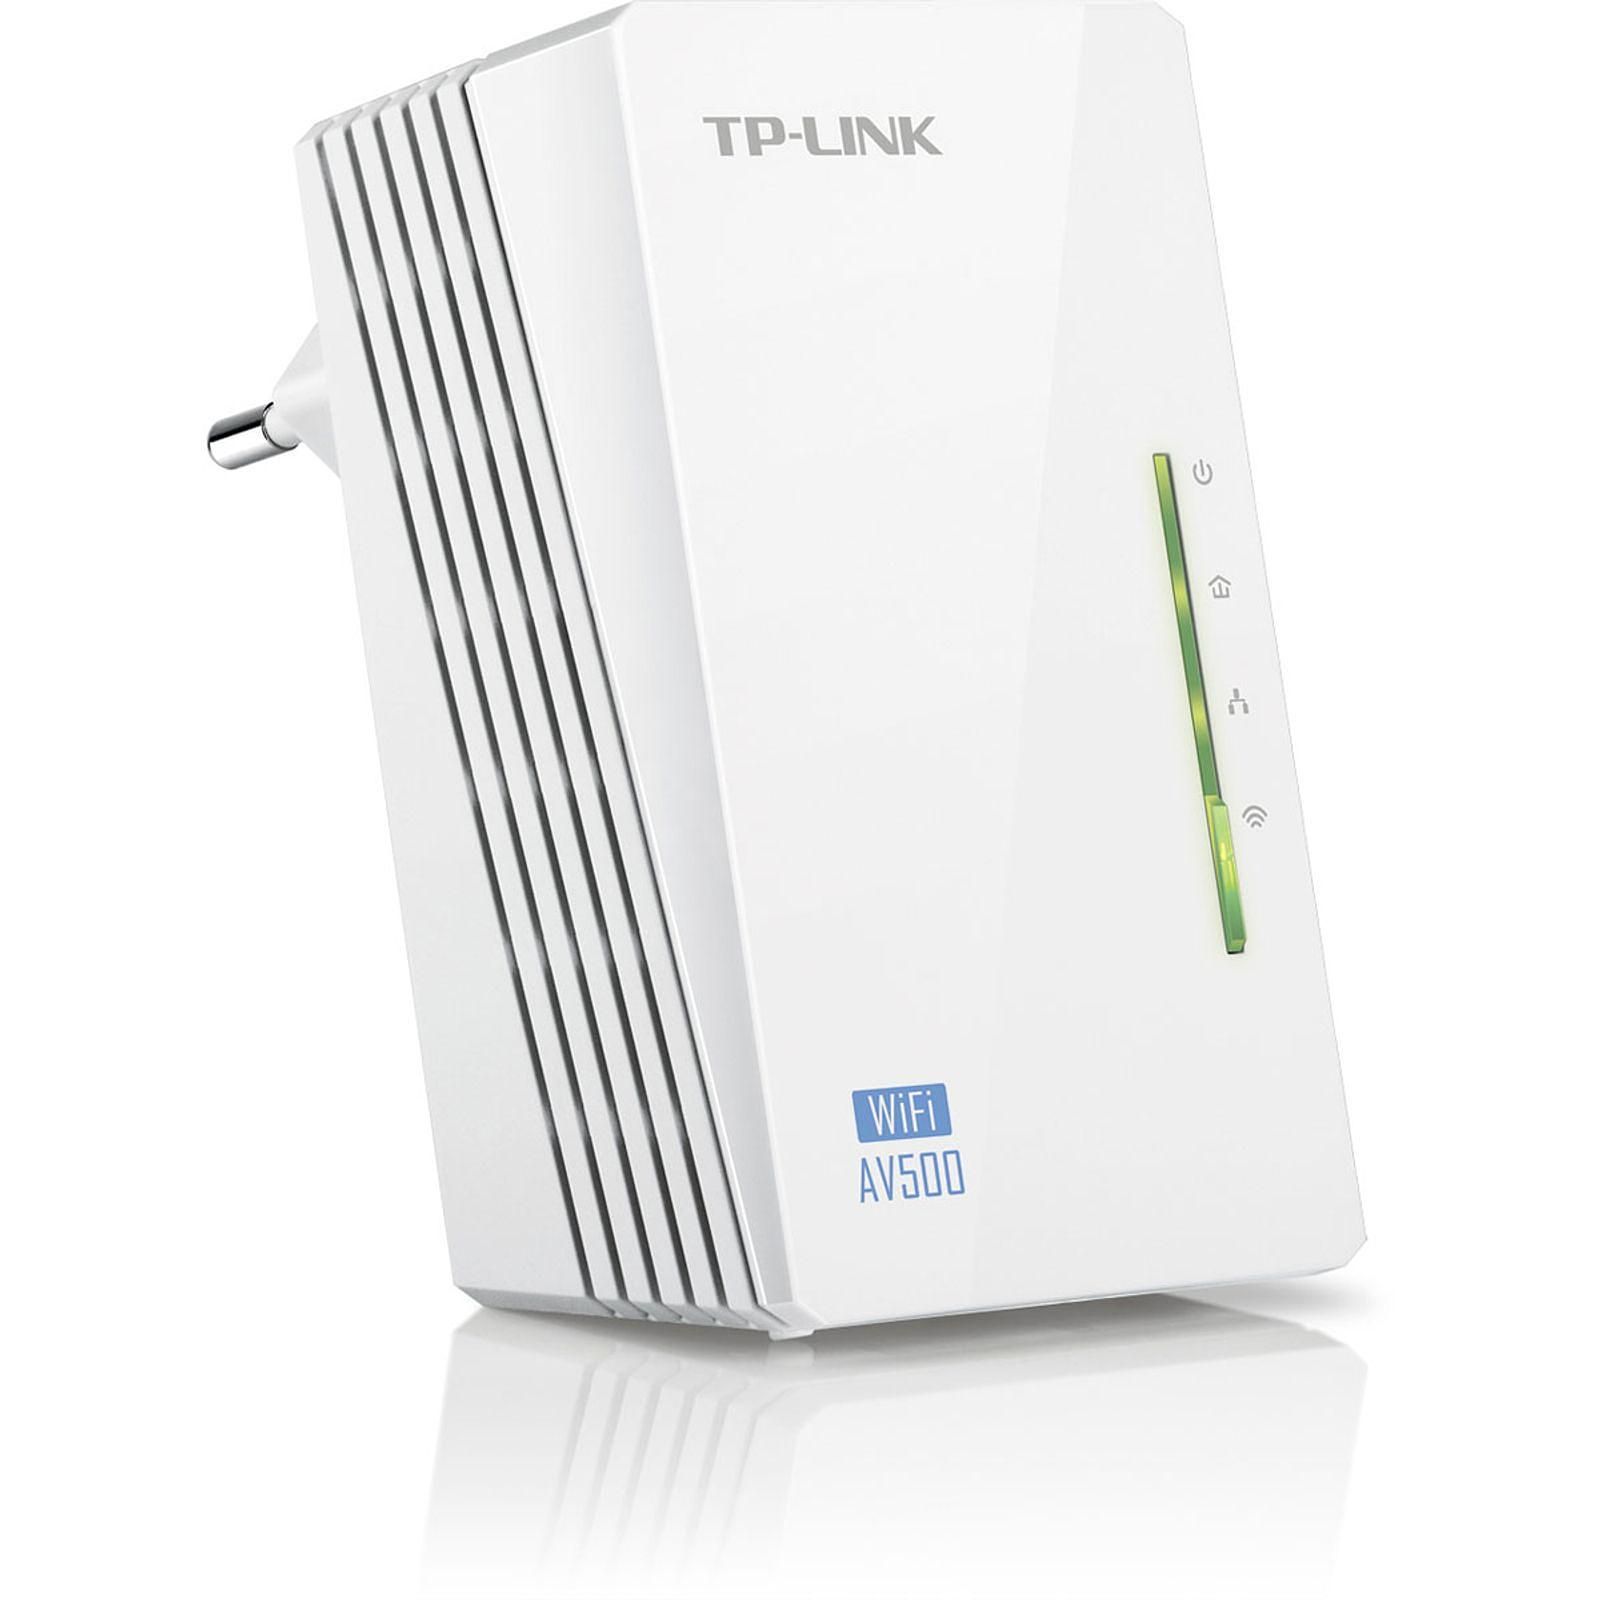 TP-Link TL-WPA4220 WiFi Extender CPL 500Mbps/WiFi 300Mbps - Adaptateur CPL - 0